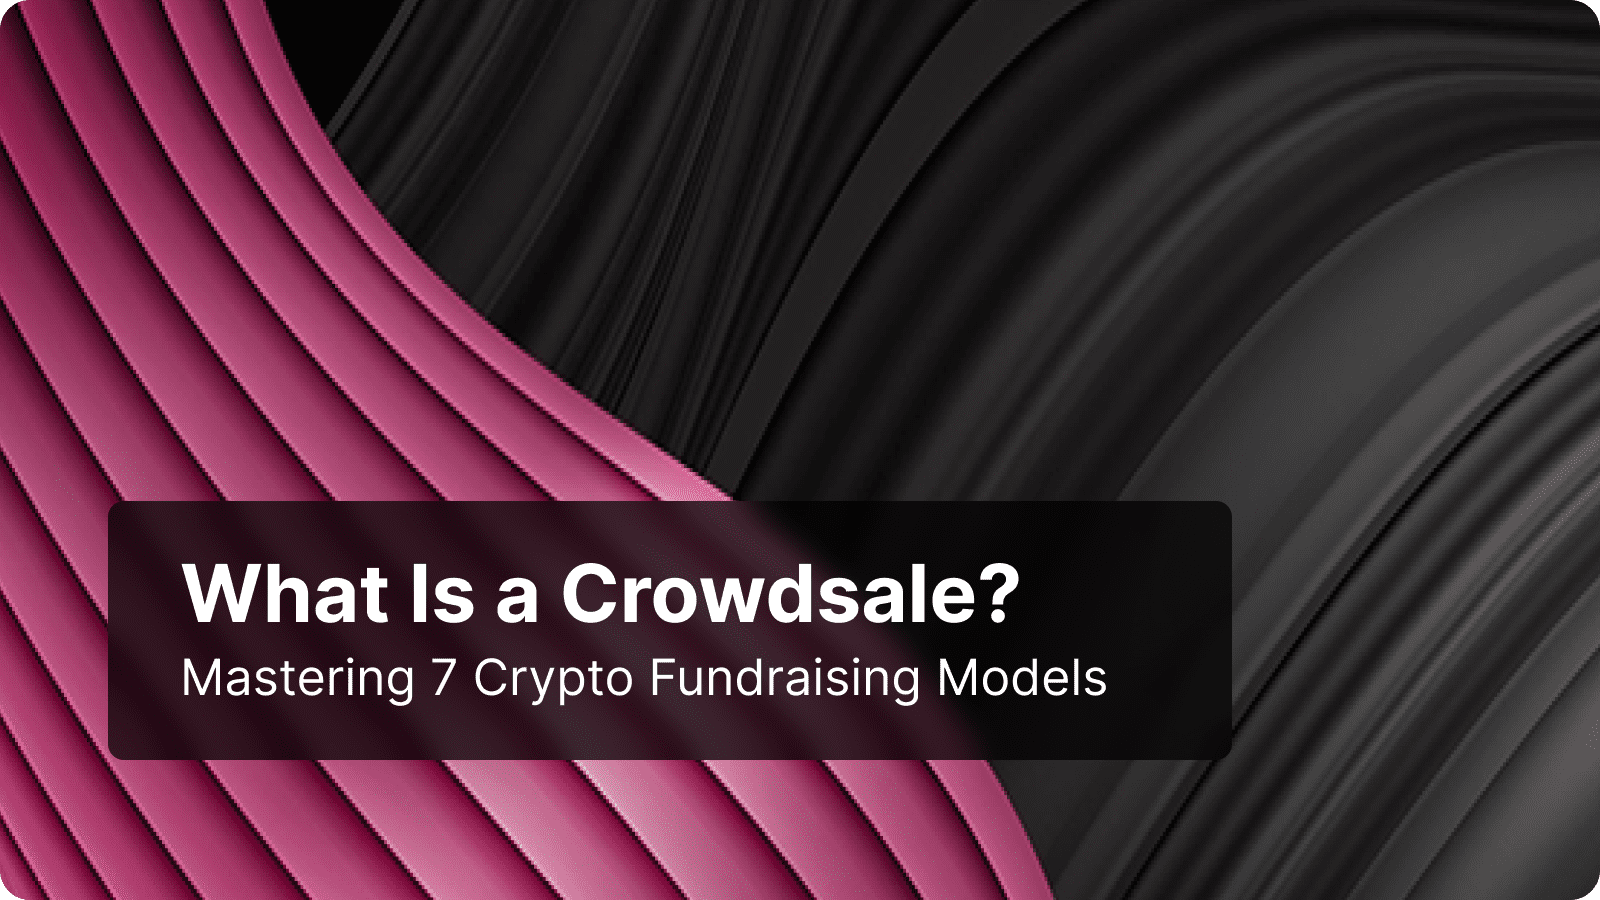 What Is a Crowdsale? Mastering 7 Crypto Fundraising Models